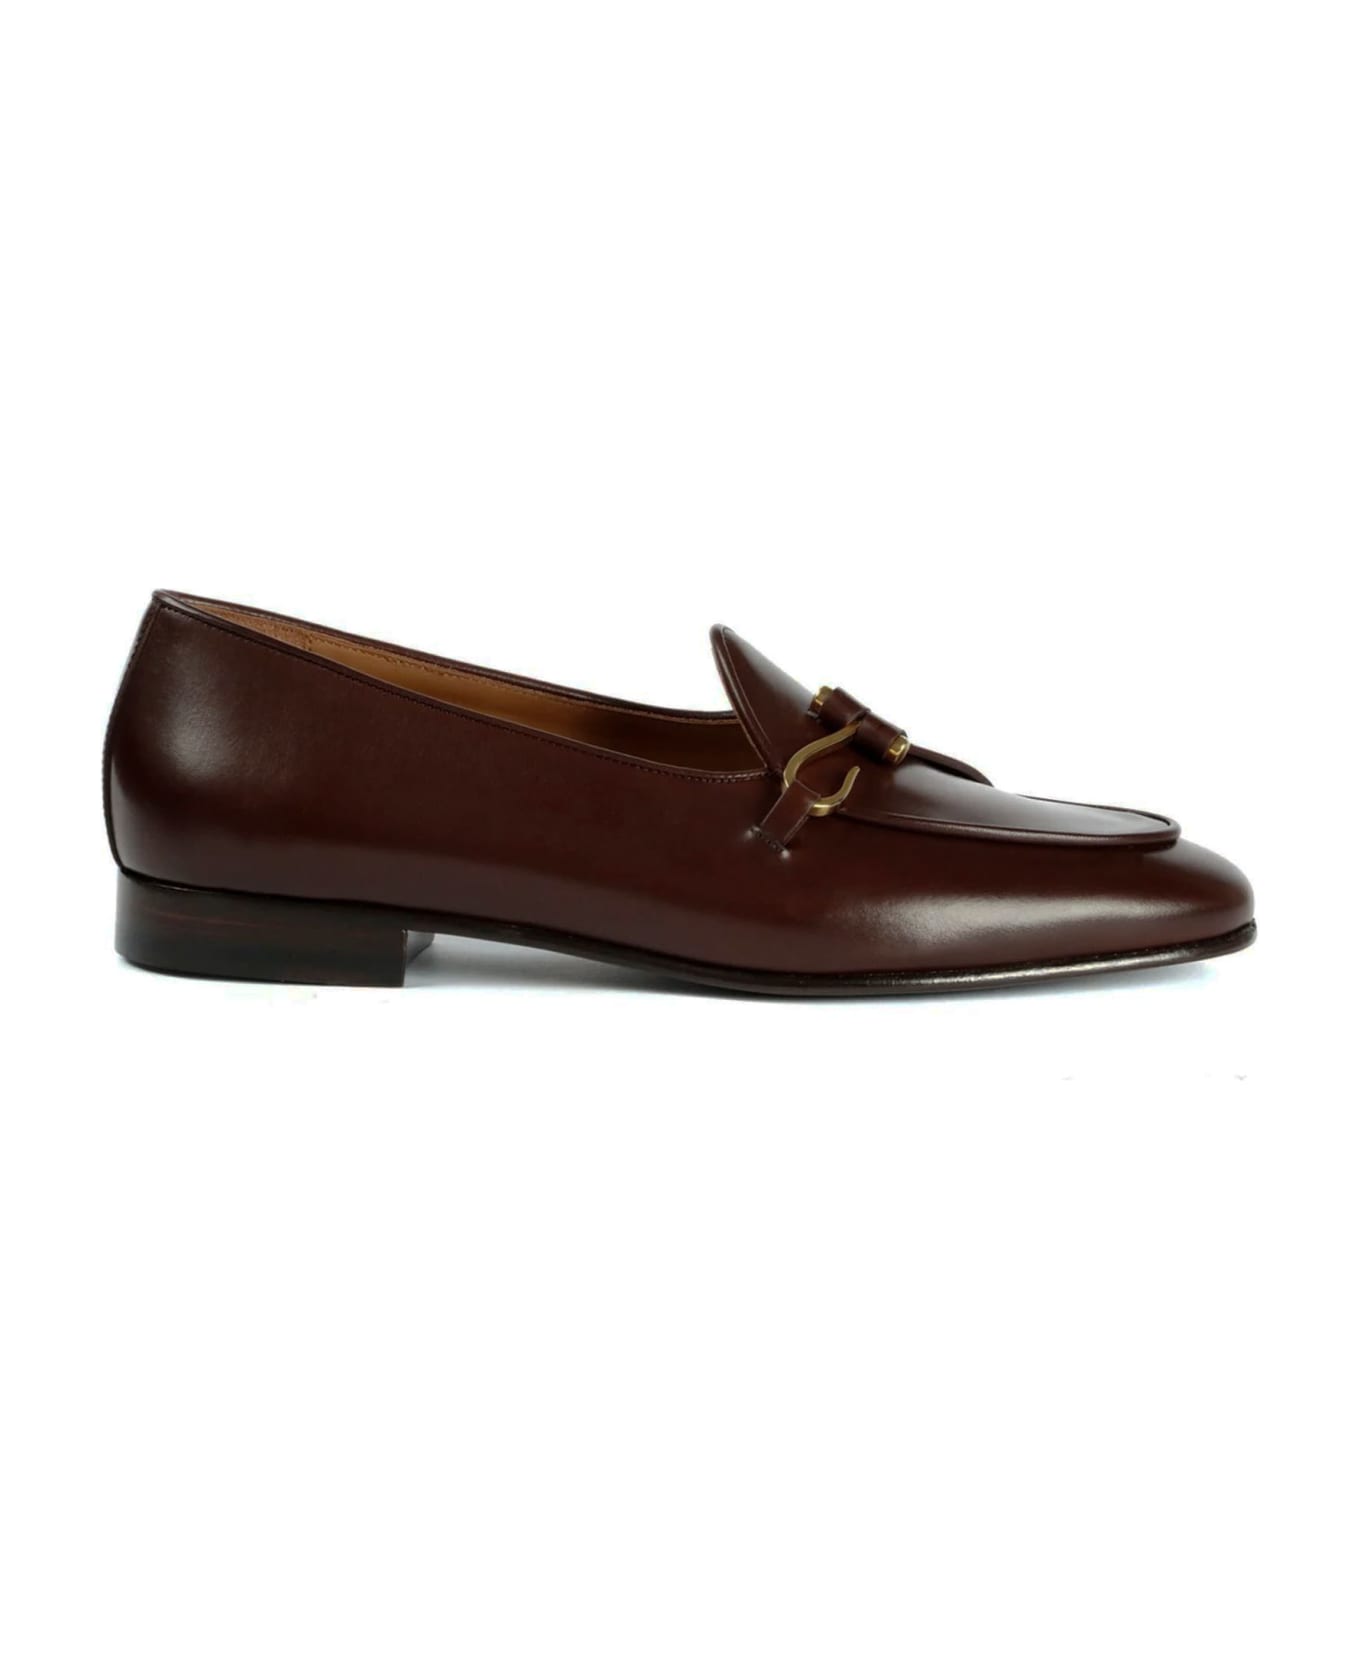 Edhen Milano Brown Calf Leather Comporta Loafers - Brown